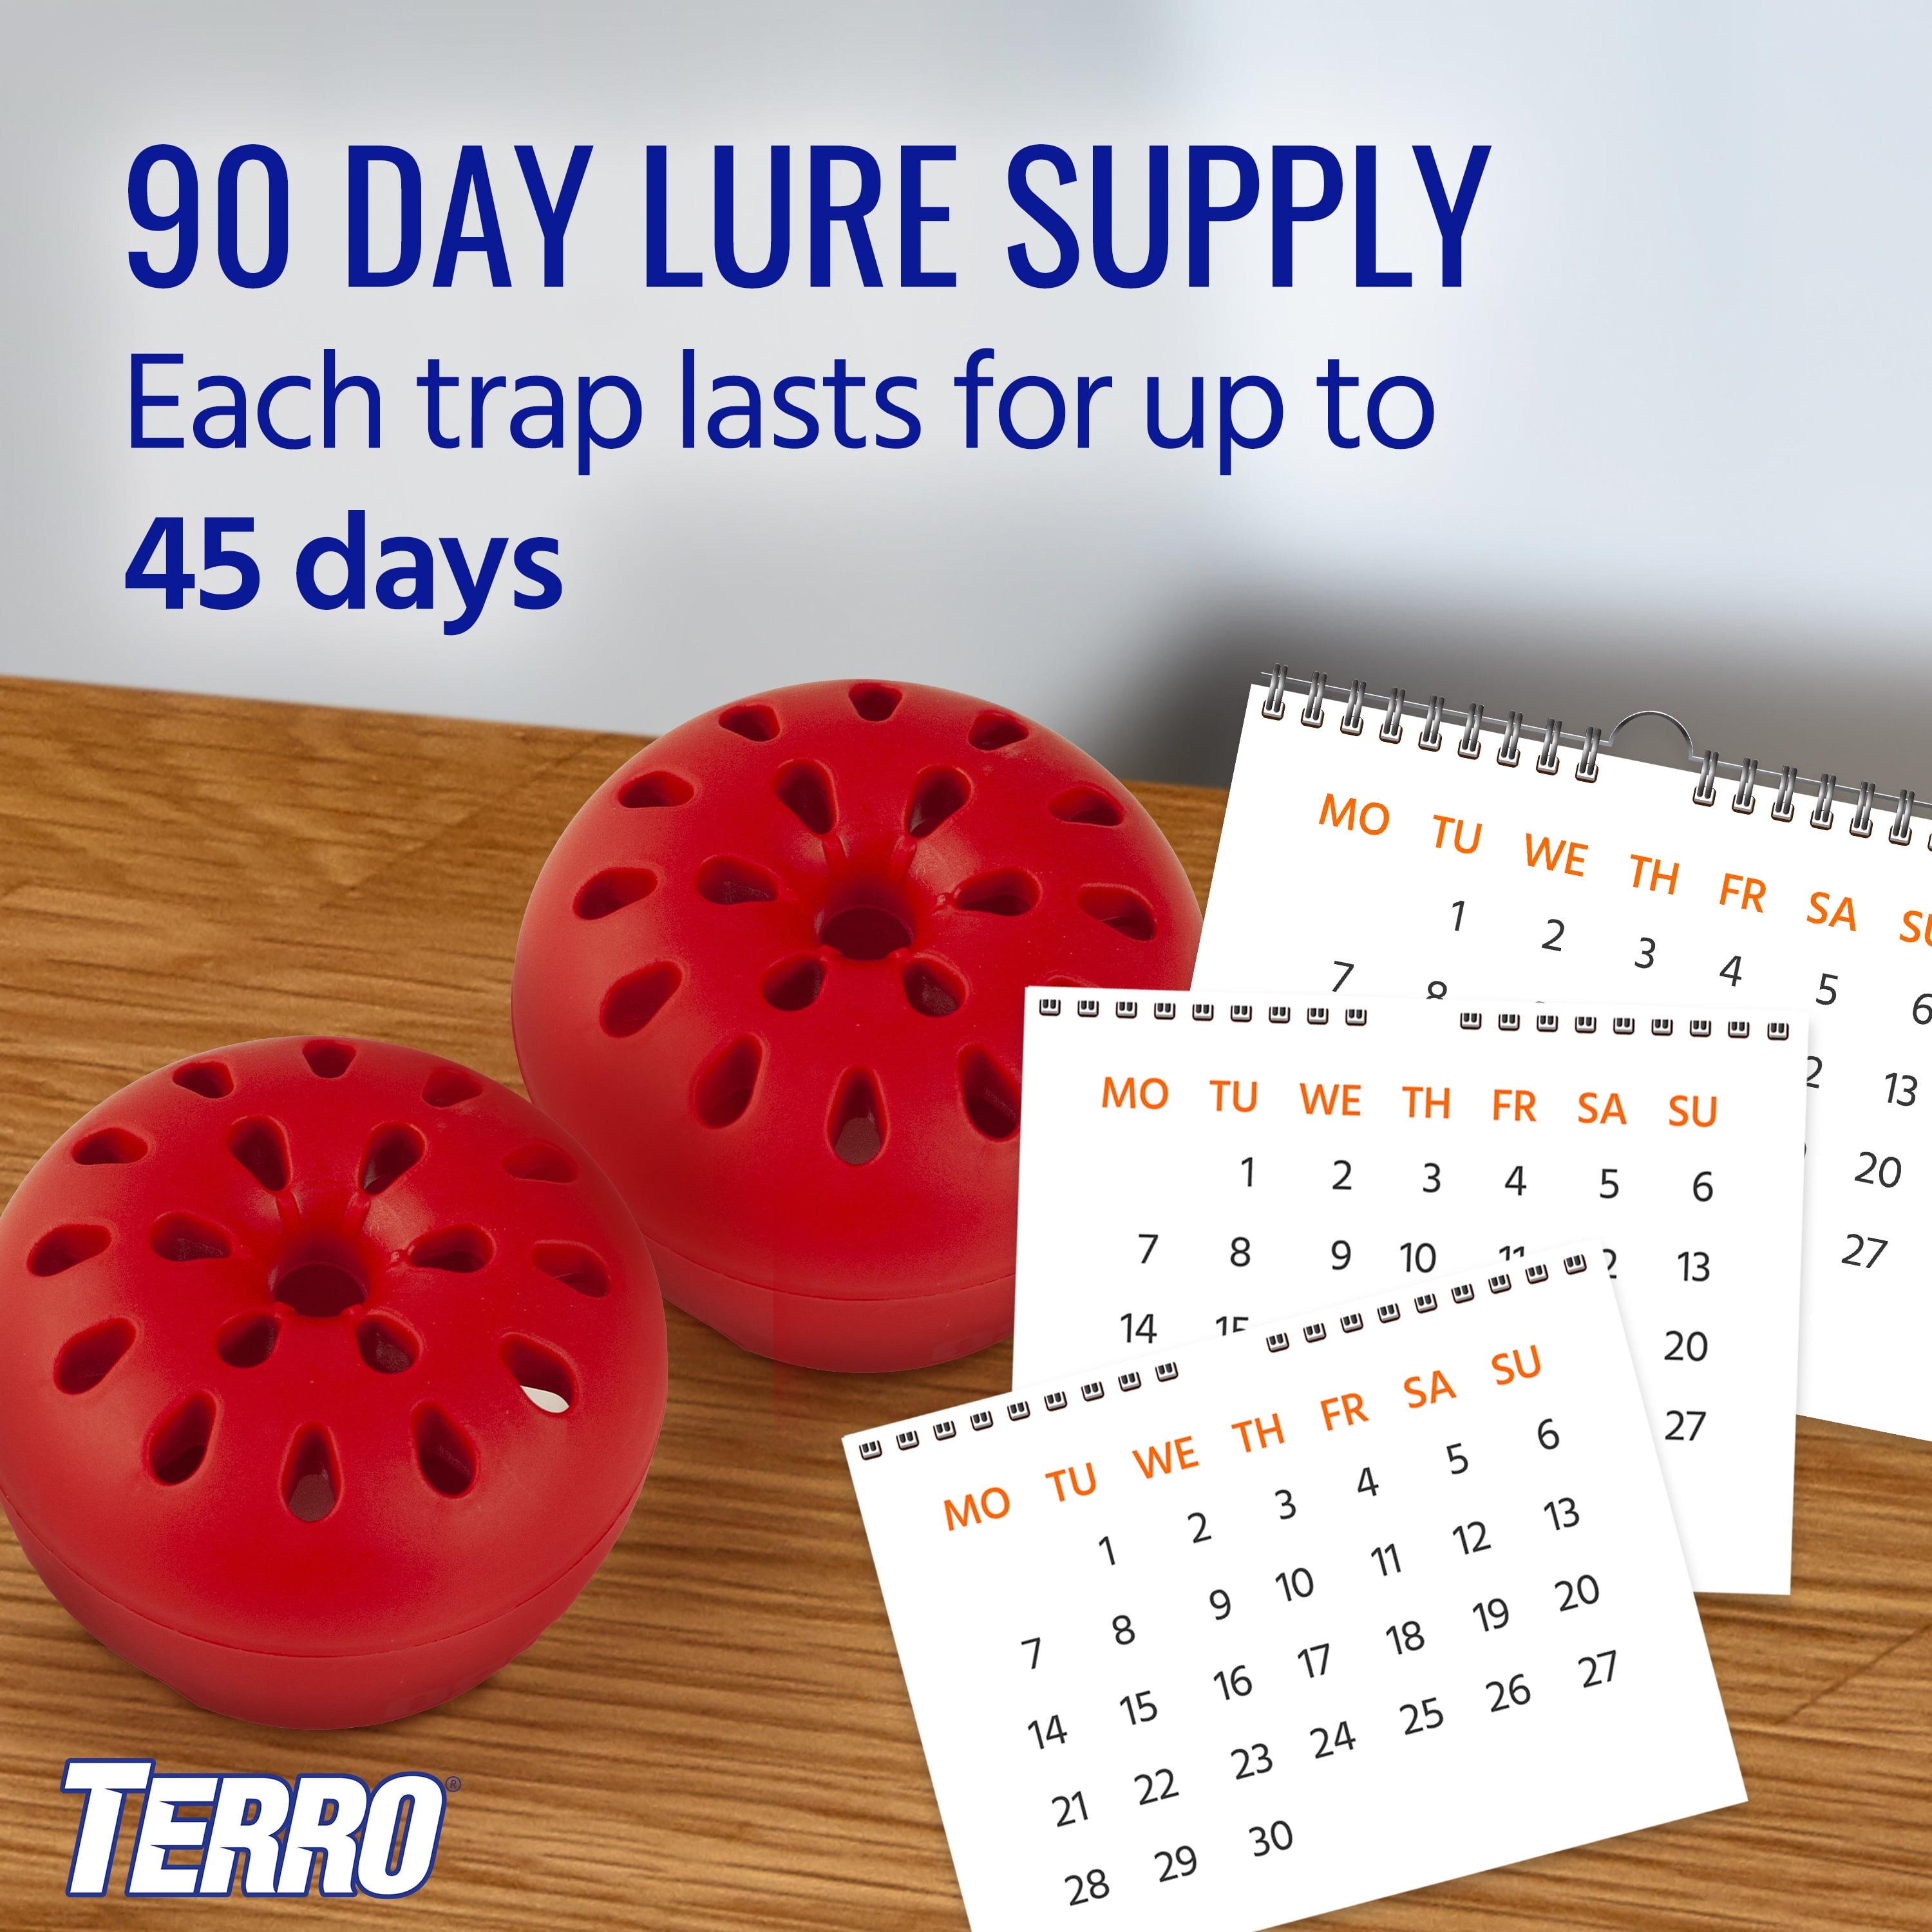 TERRO Wasp & Fly Trap Plus Fruit Fly Refill - 3 Pack 